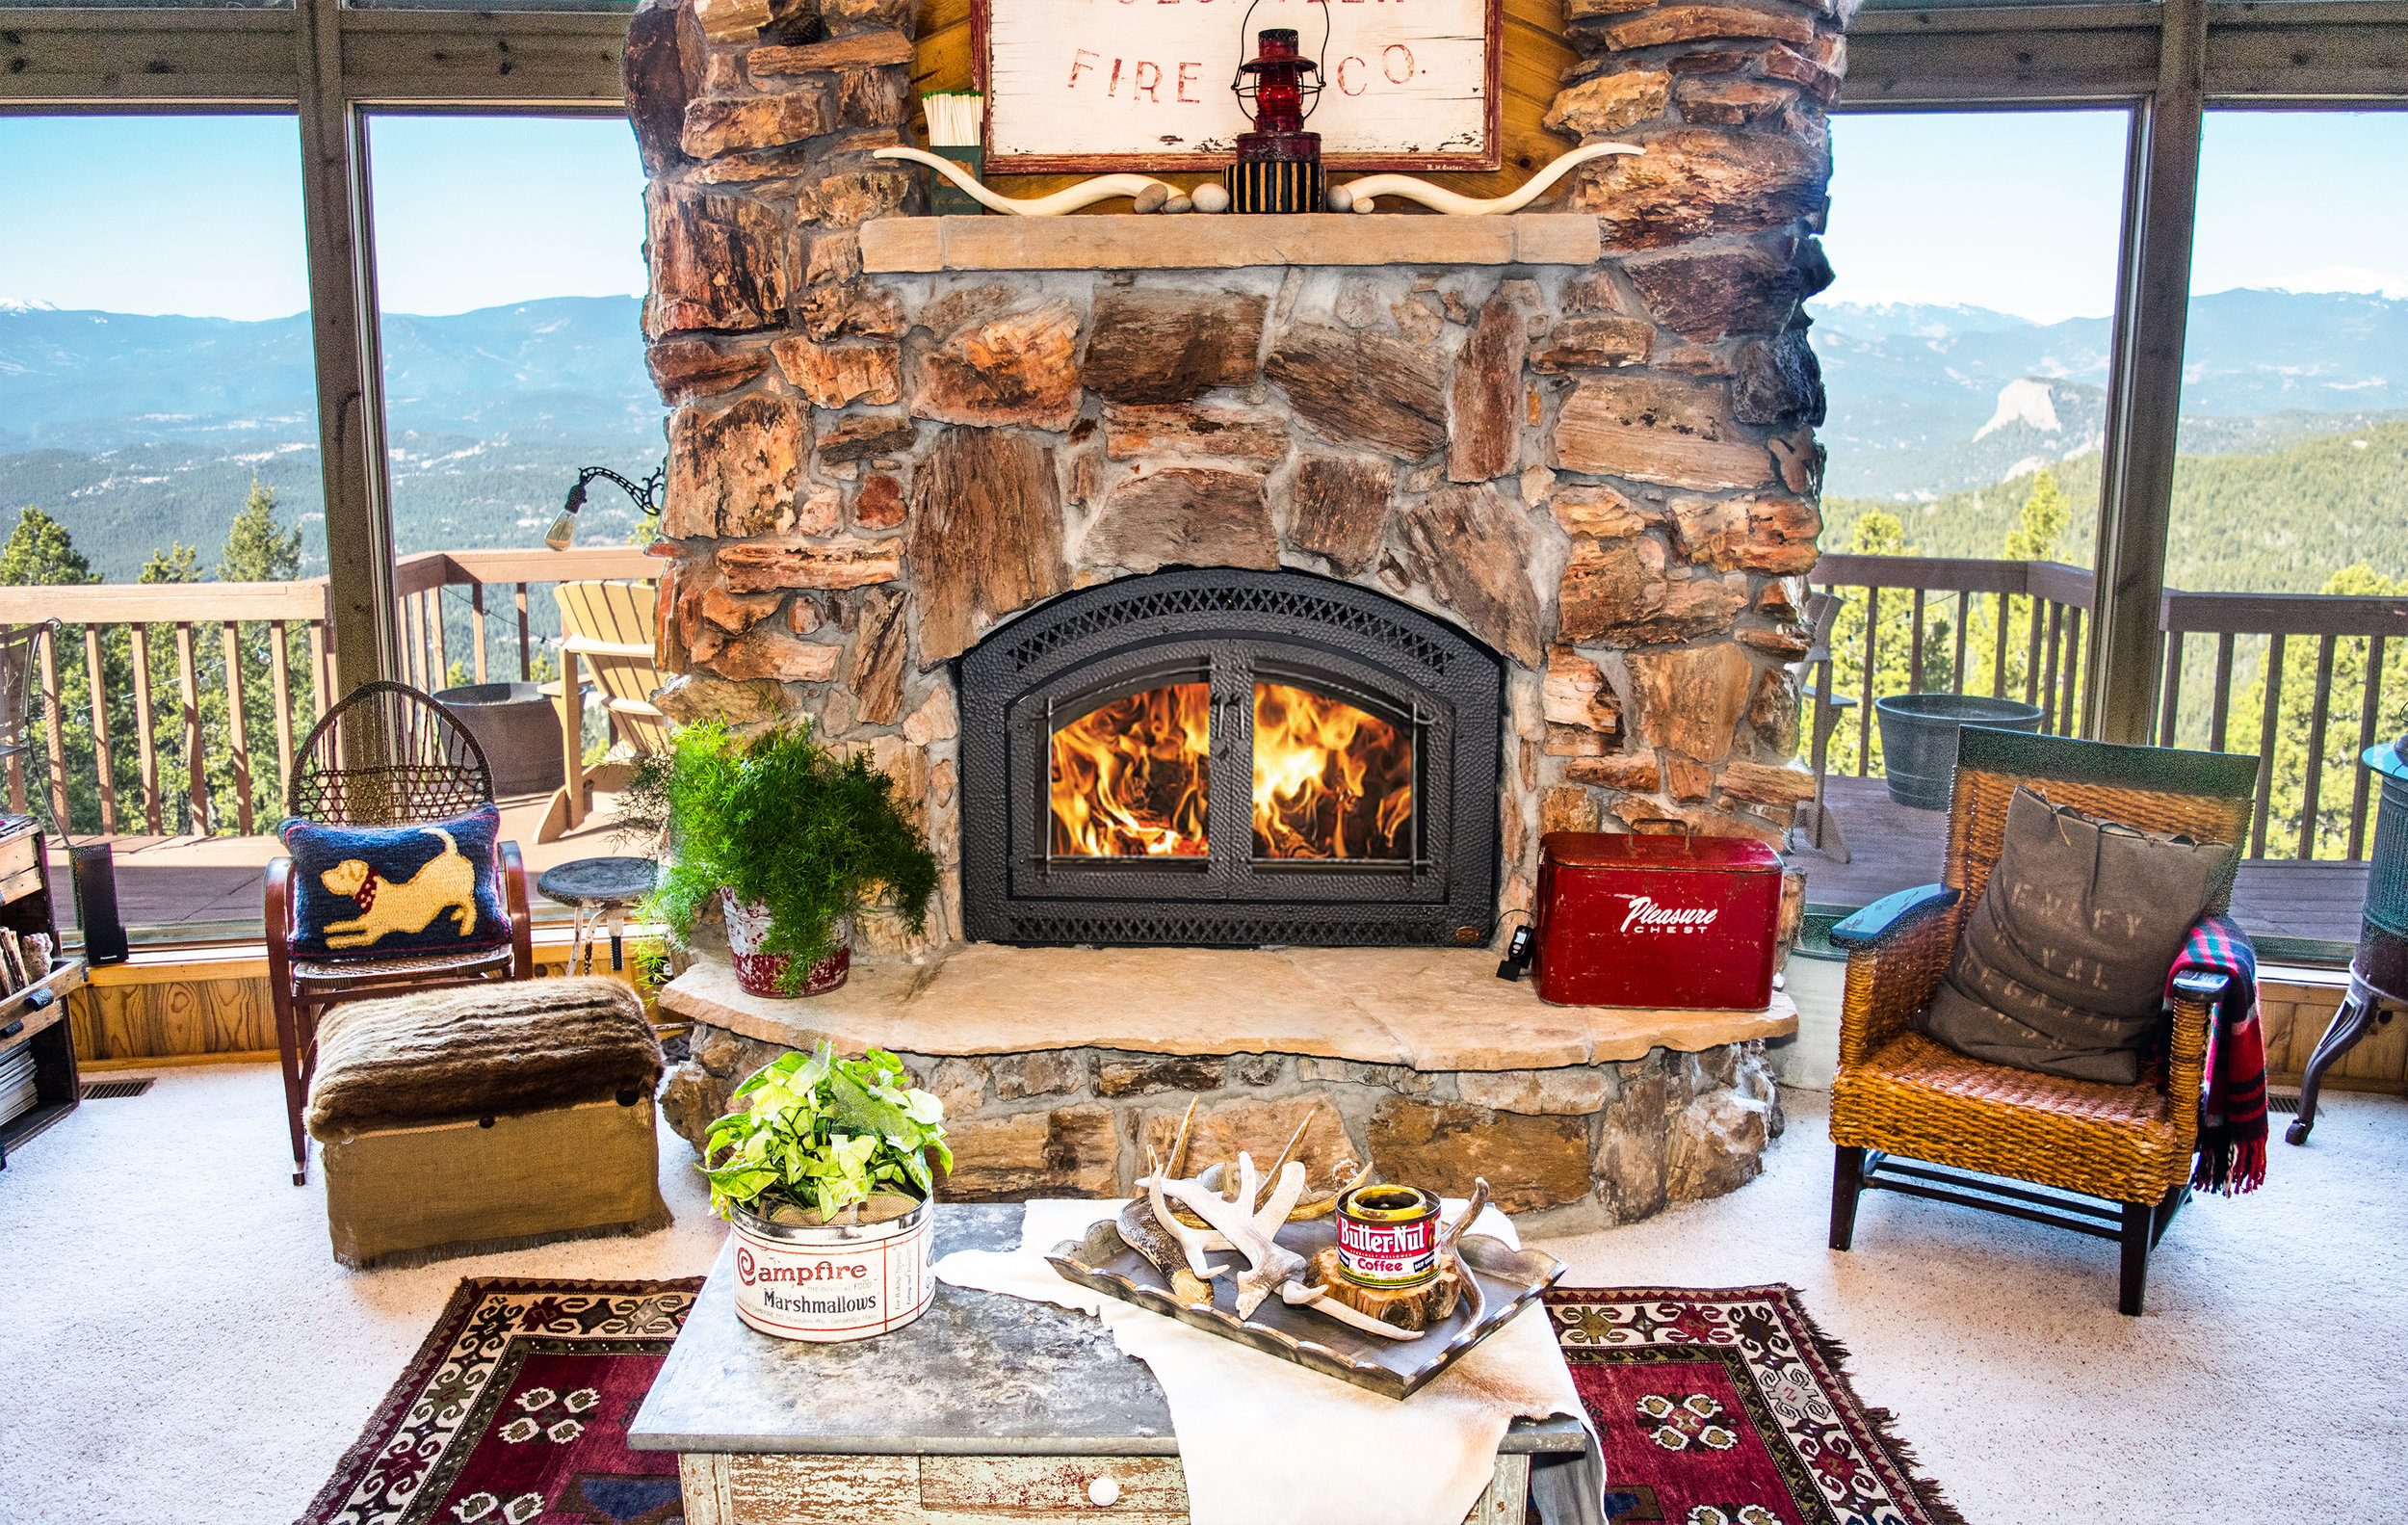 FireplaceX 44 Elite wood burning fireplace in a traditional Colorado mountain home.